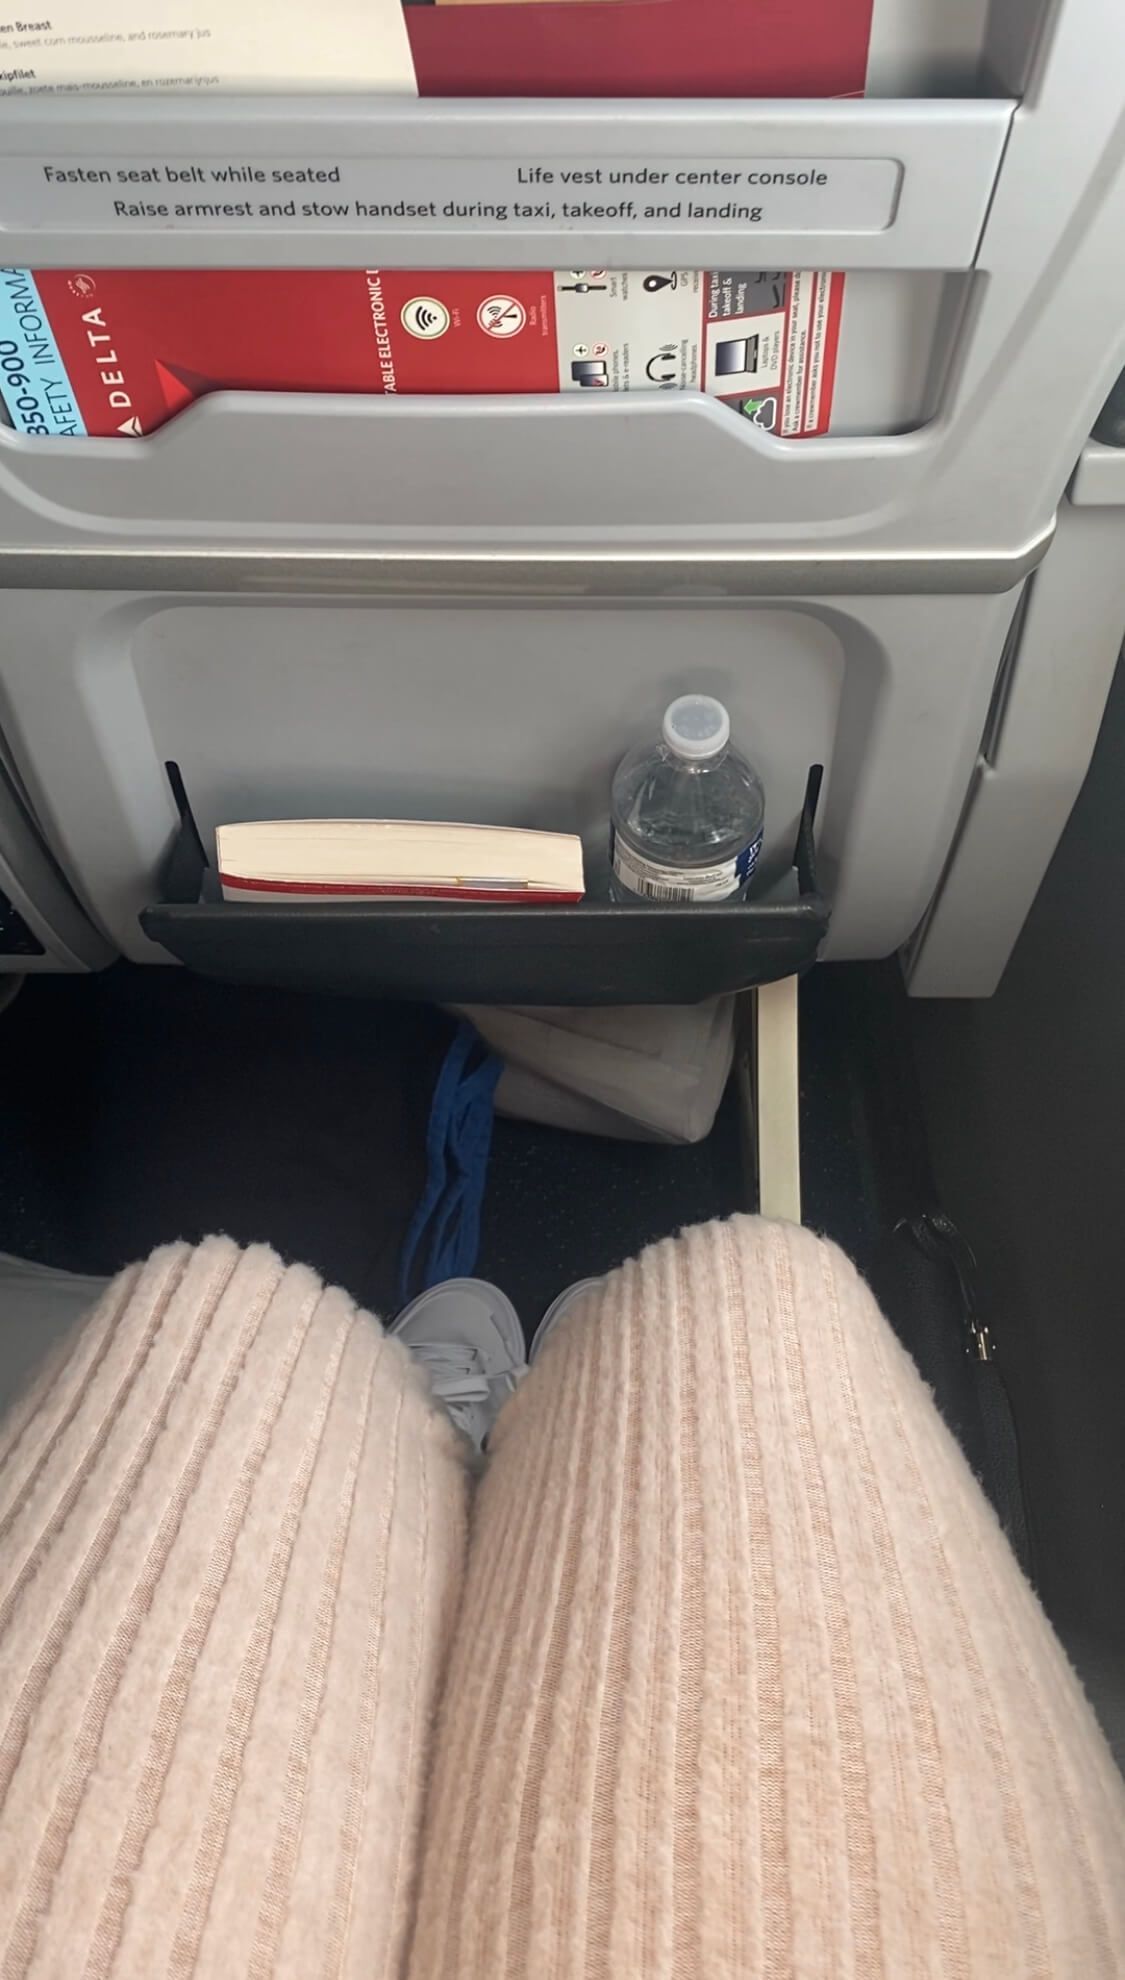 delta premium select seat legroom tan pants white shoes water bottle and book in seat pocket showing several inches of legroom